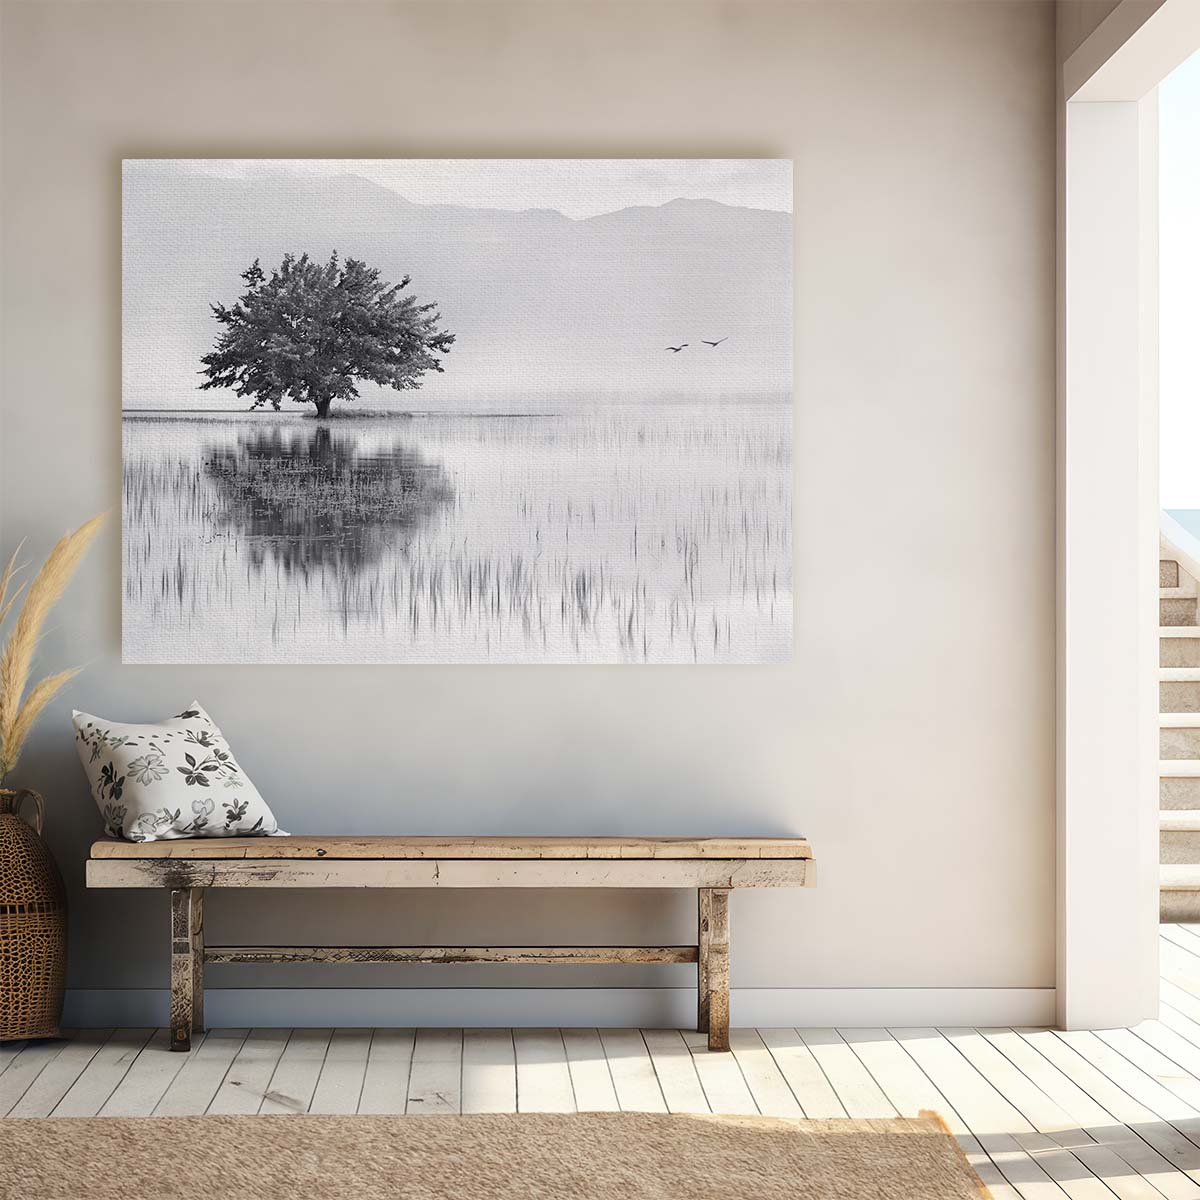 Minimalist Spring Lake & Trees Reflection Wall Art by Luxuriance Designs. Made in USA.